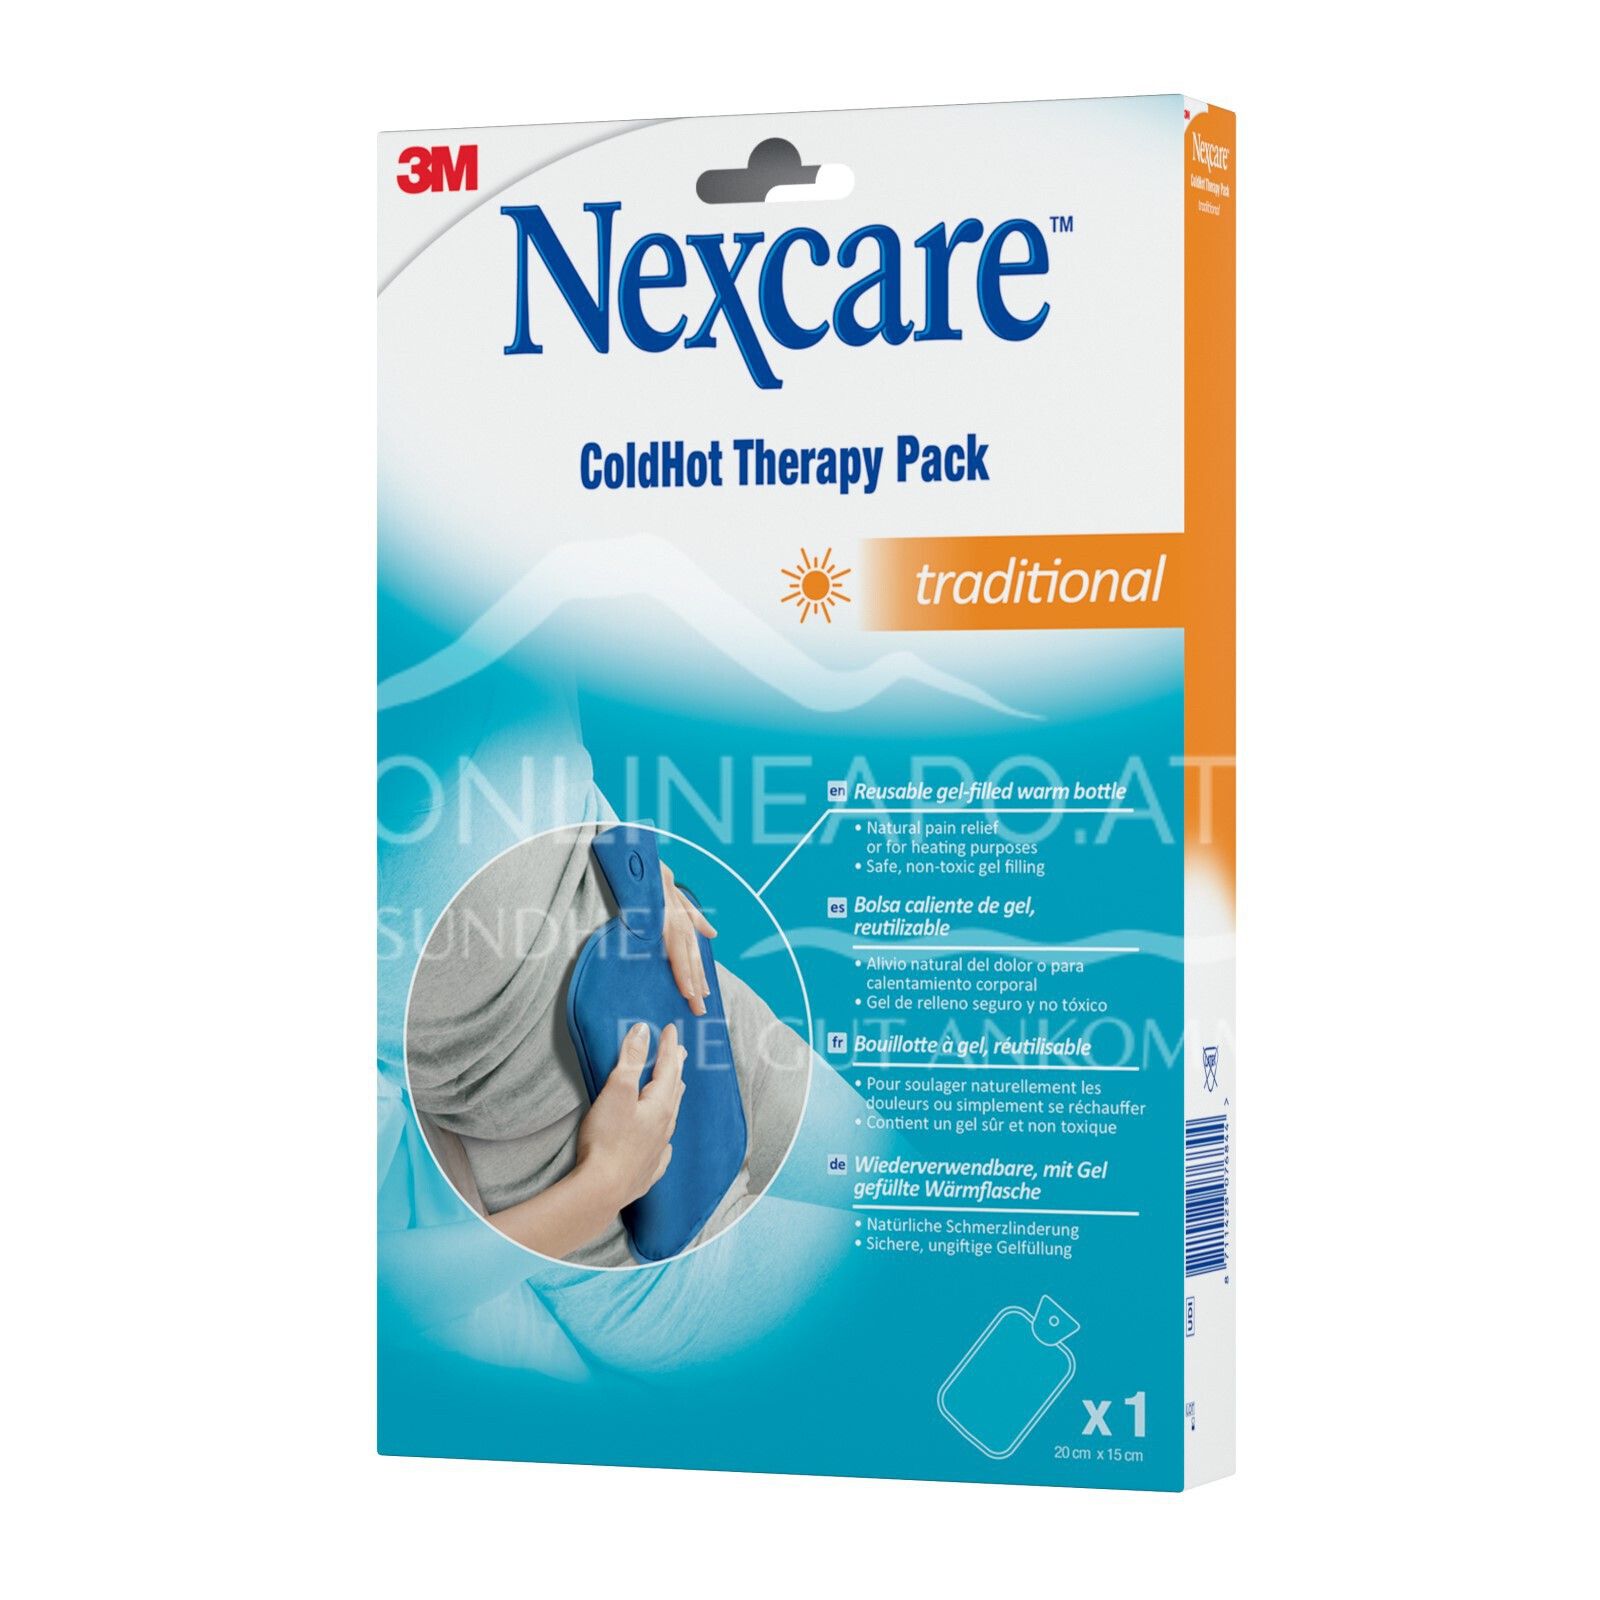 3M Nexcare™ ColdHot Therapy Pack Traditional